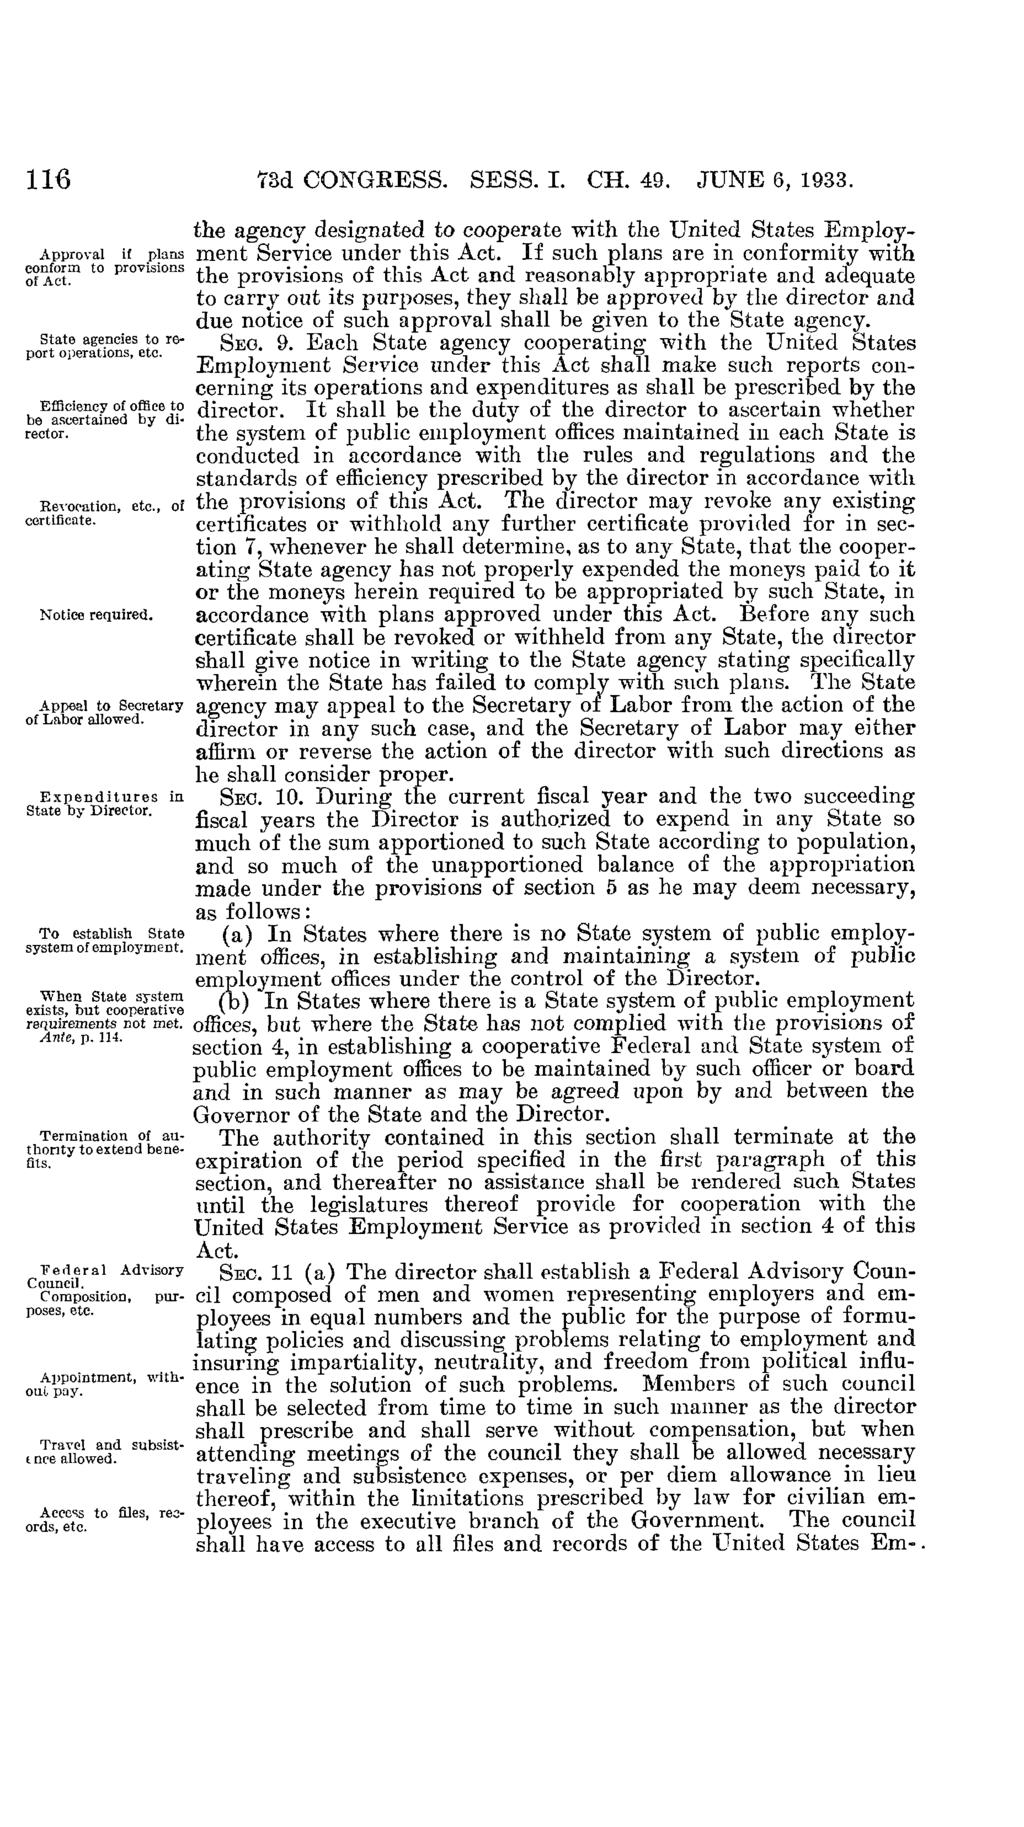 1116 13d CONGRESS SESS I CH 49 JUNE 6, 1933 the agency designated to cooperate with the United States Employ- Approval if plans ment Service under this Act If such plans are in conformity with